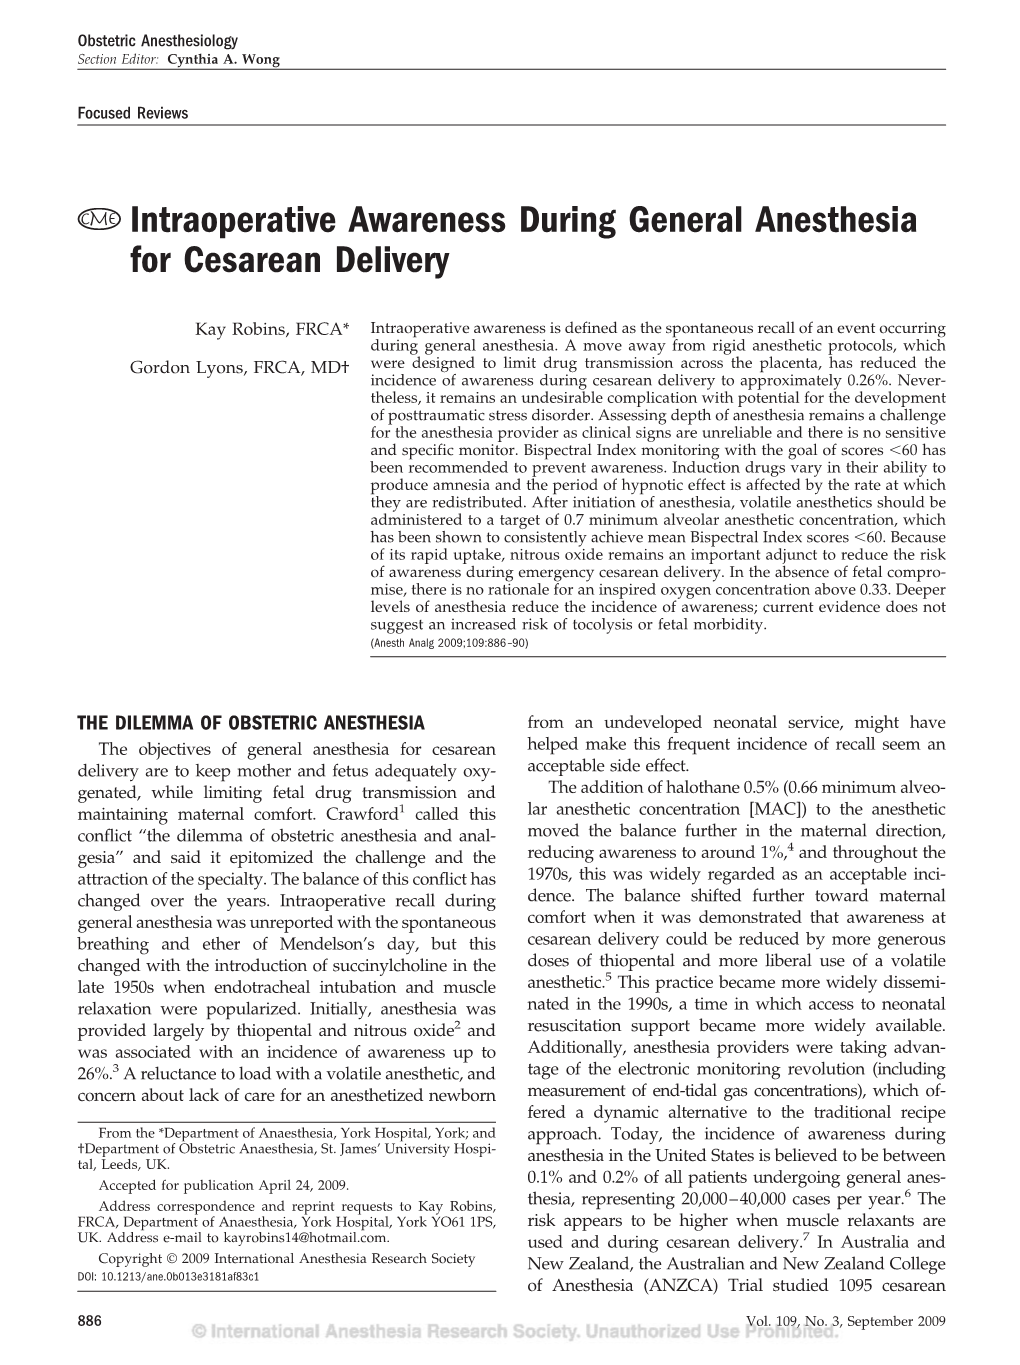 Intraoperative Awareness During General Anesthesia for Cesarean Delivery